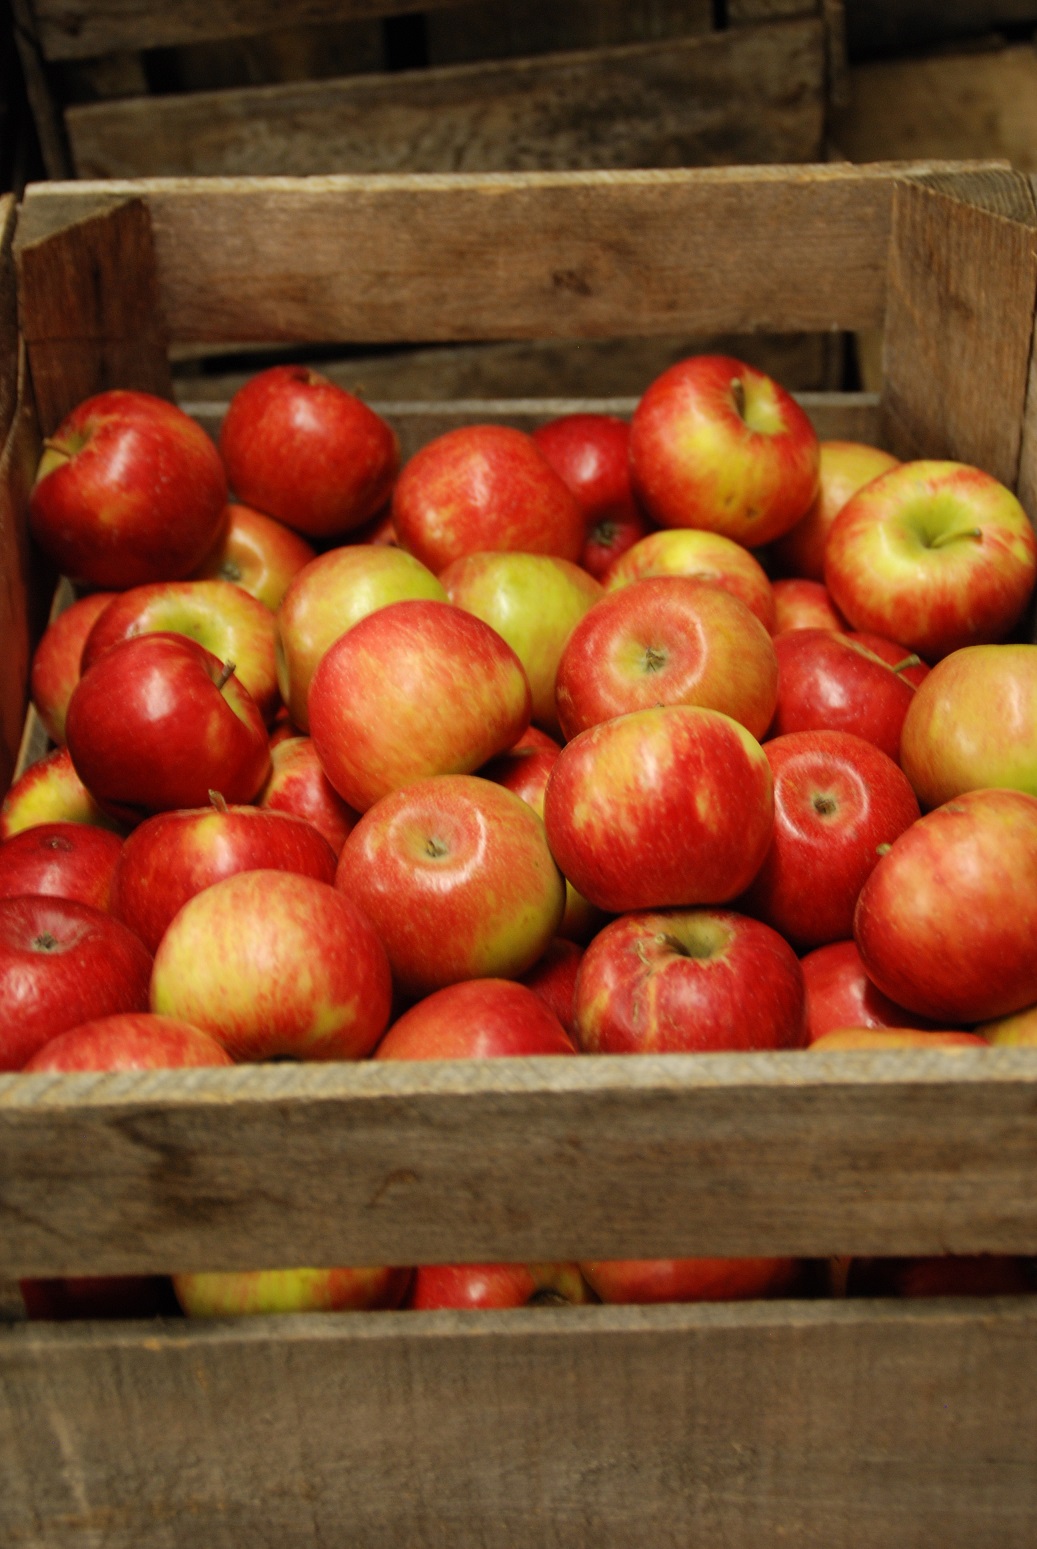 Apples stored for the winter